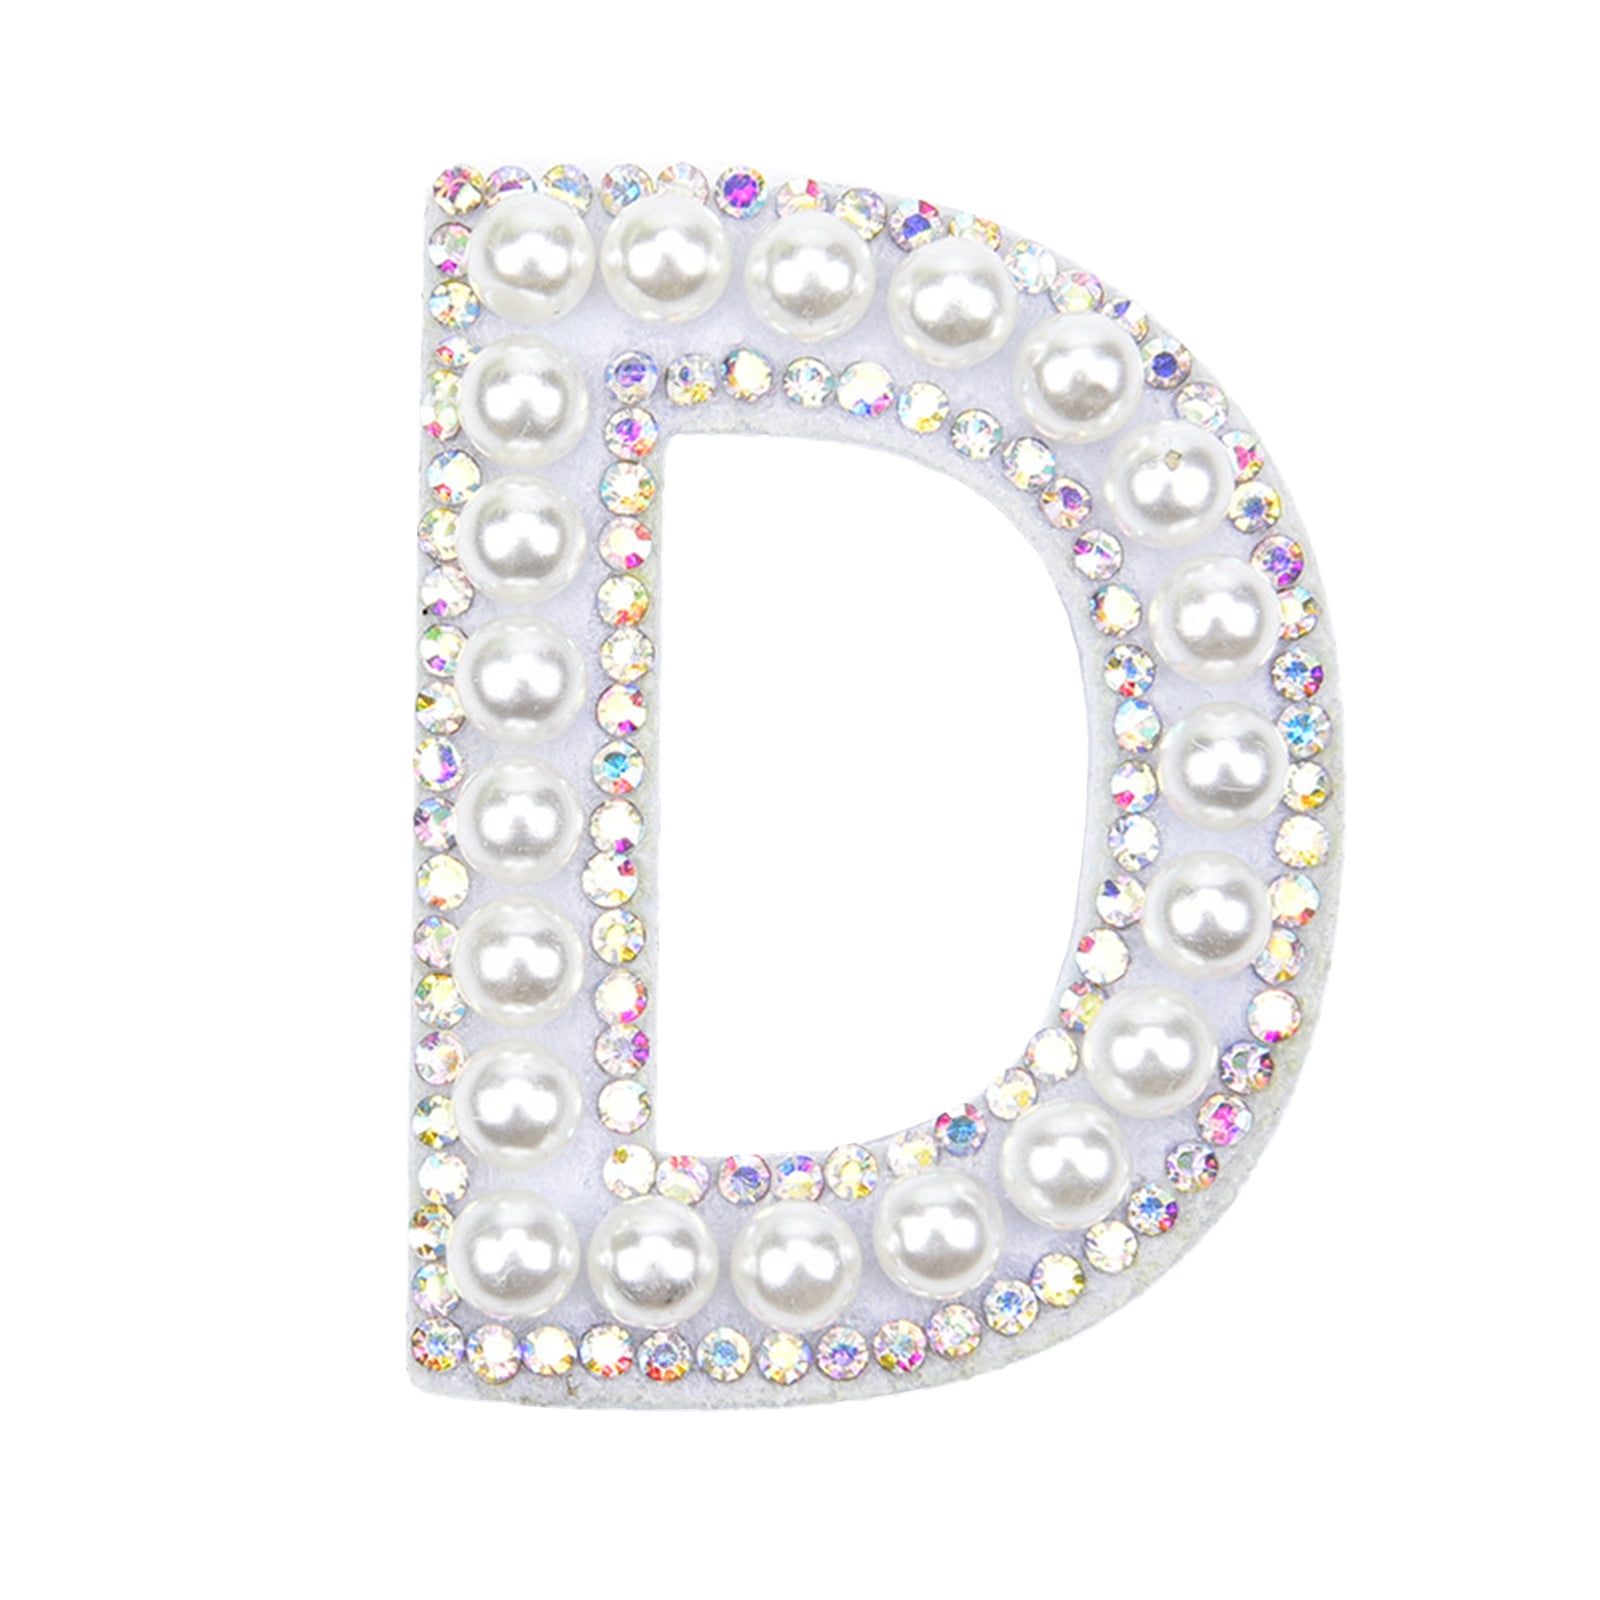 Cobble Glitter Rhinestone Pearl AZ on Decorative Iron Letters Supplies Cobble Clothes Craft Sew Letter Applique Letters English for DIY Stickers